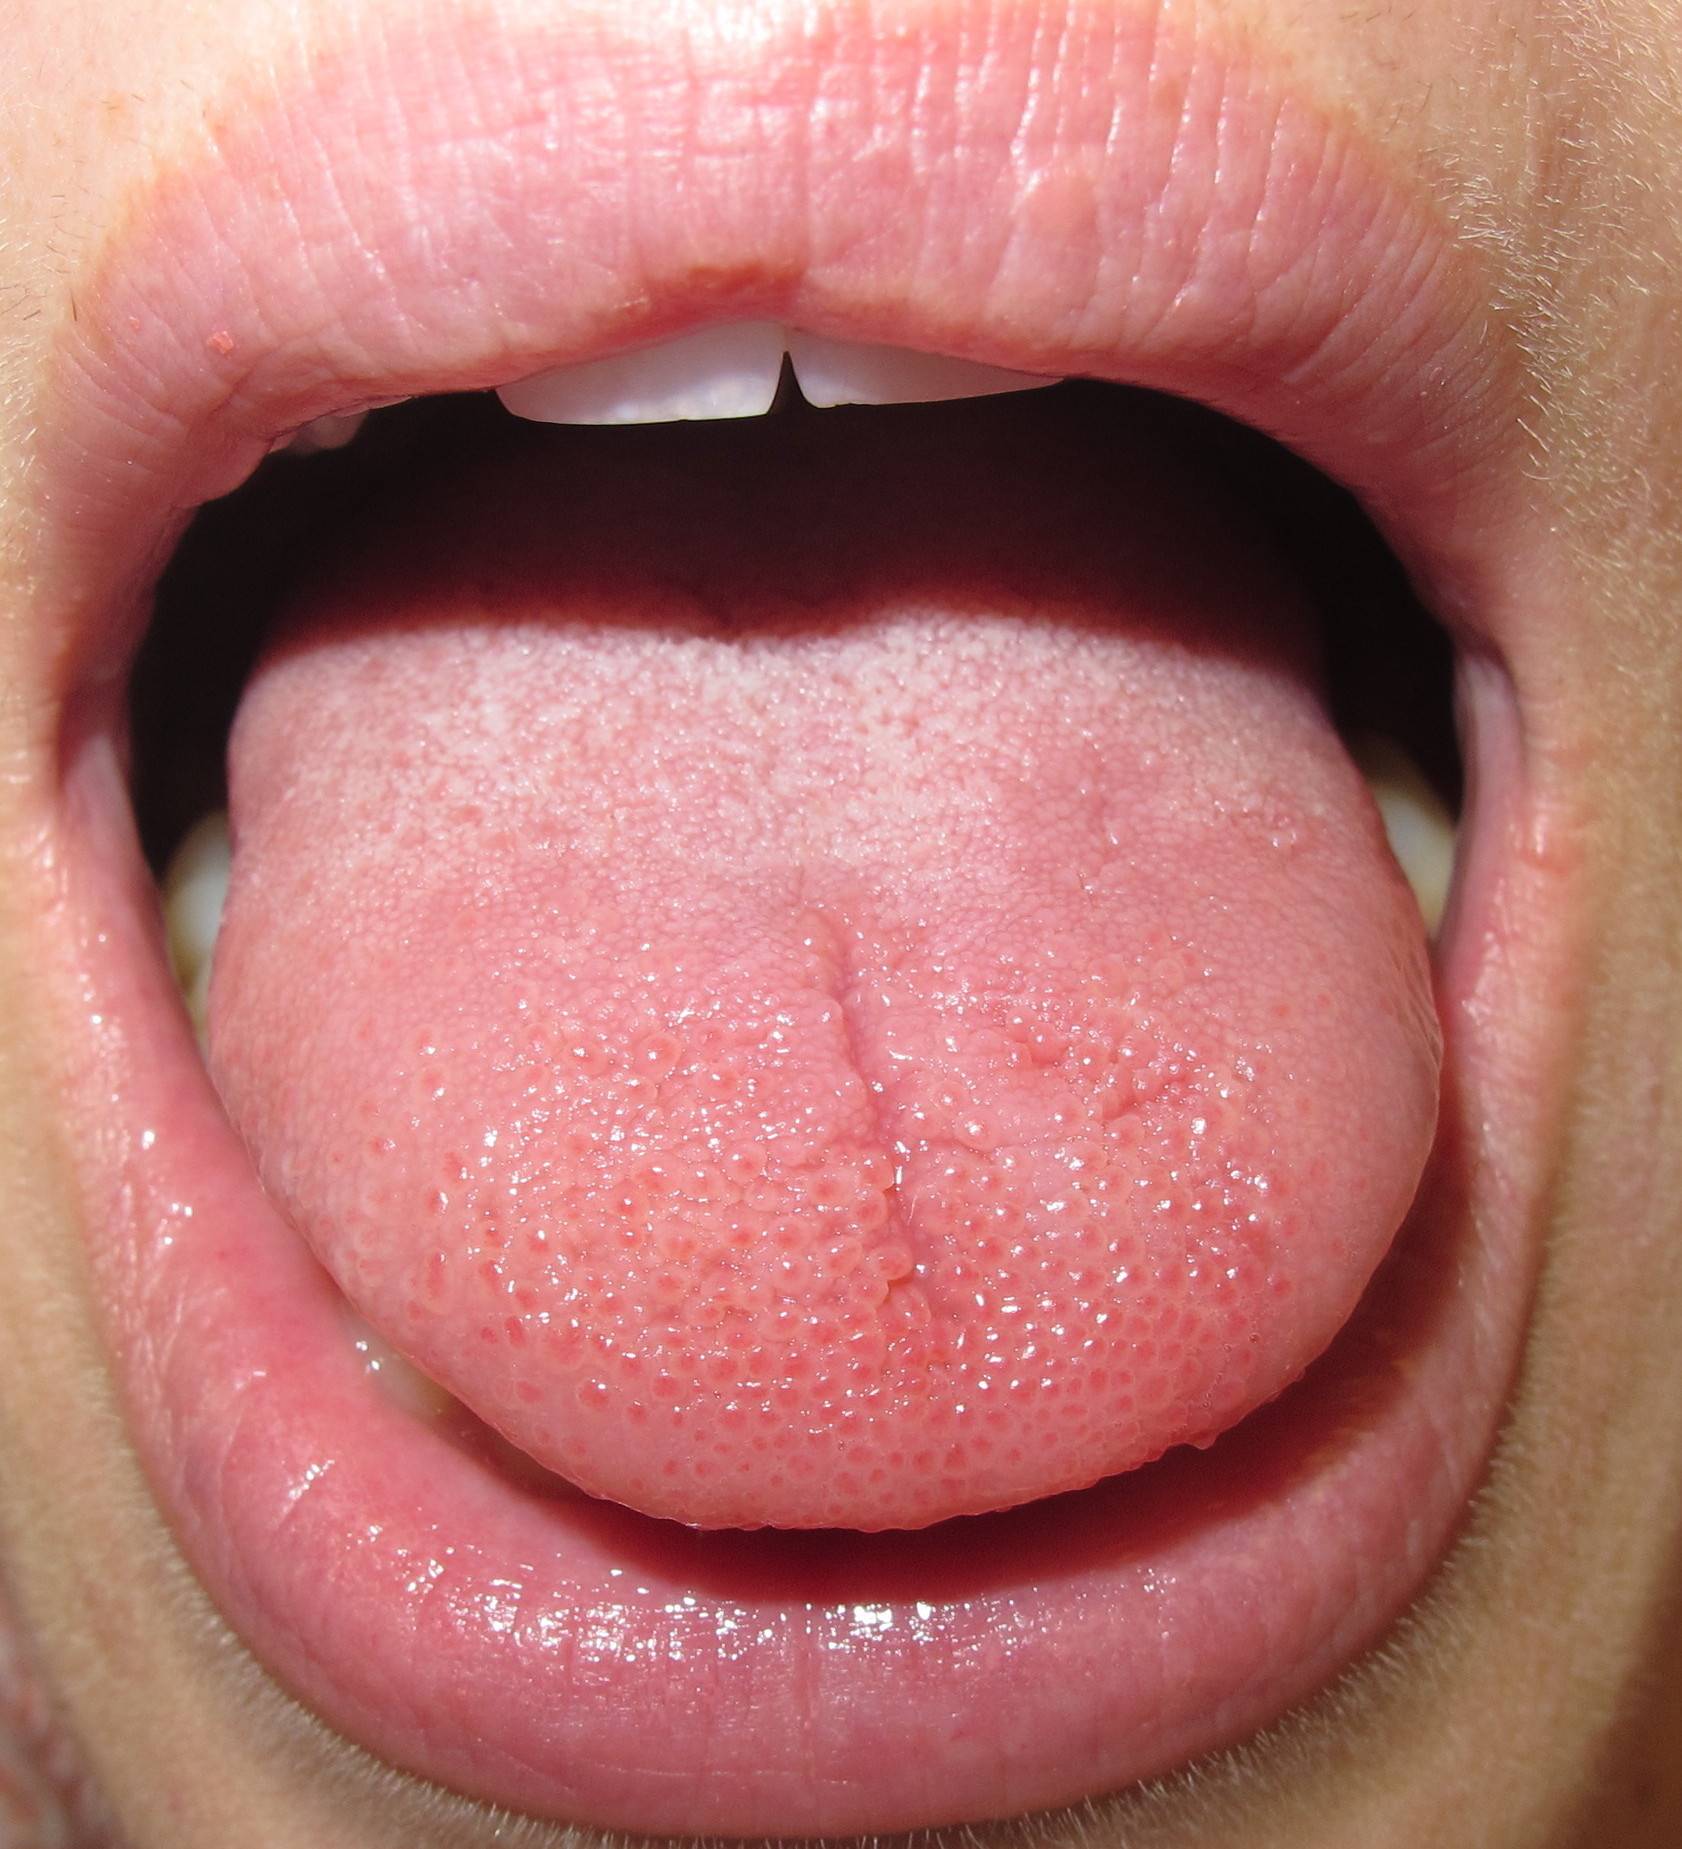 This strange condition could explain why your tongue feels weird